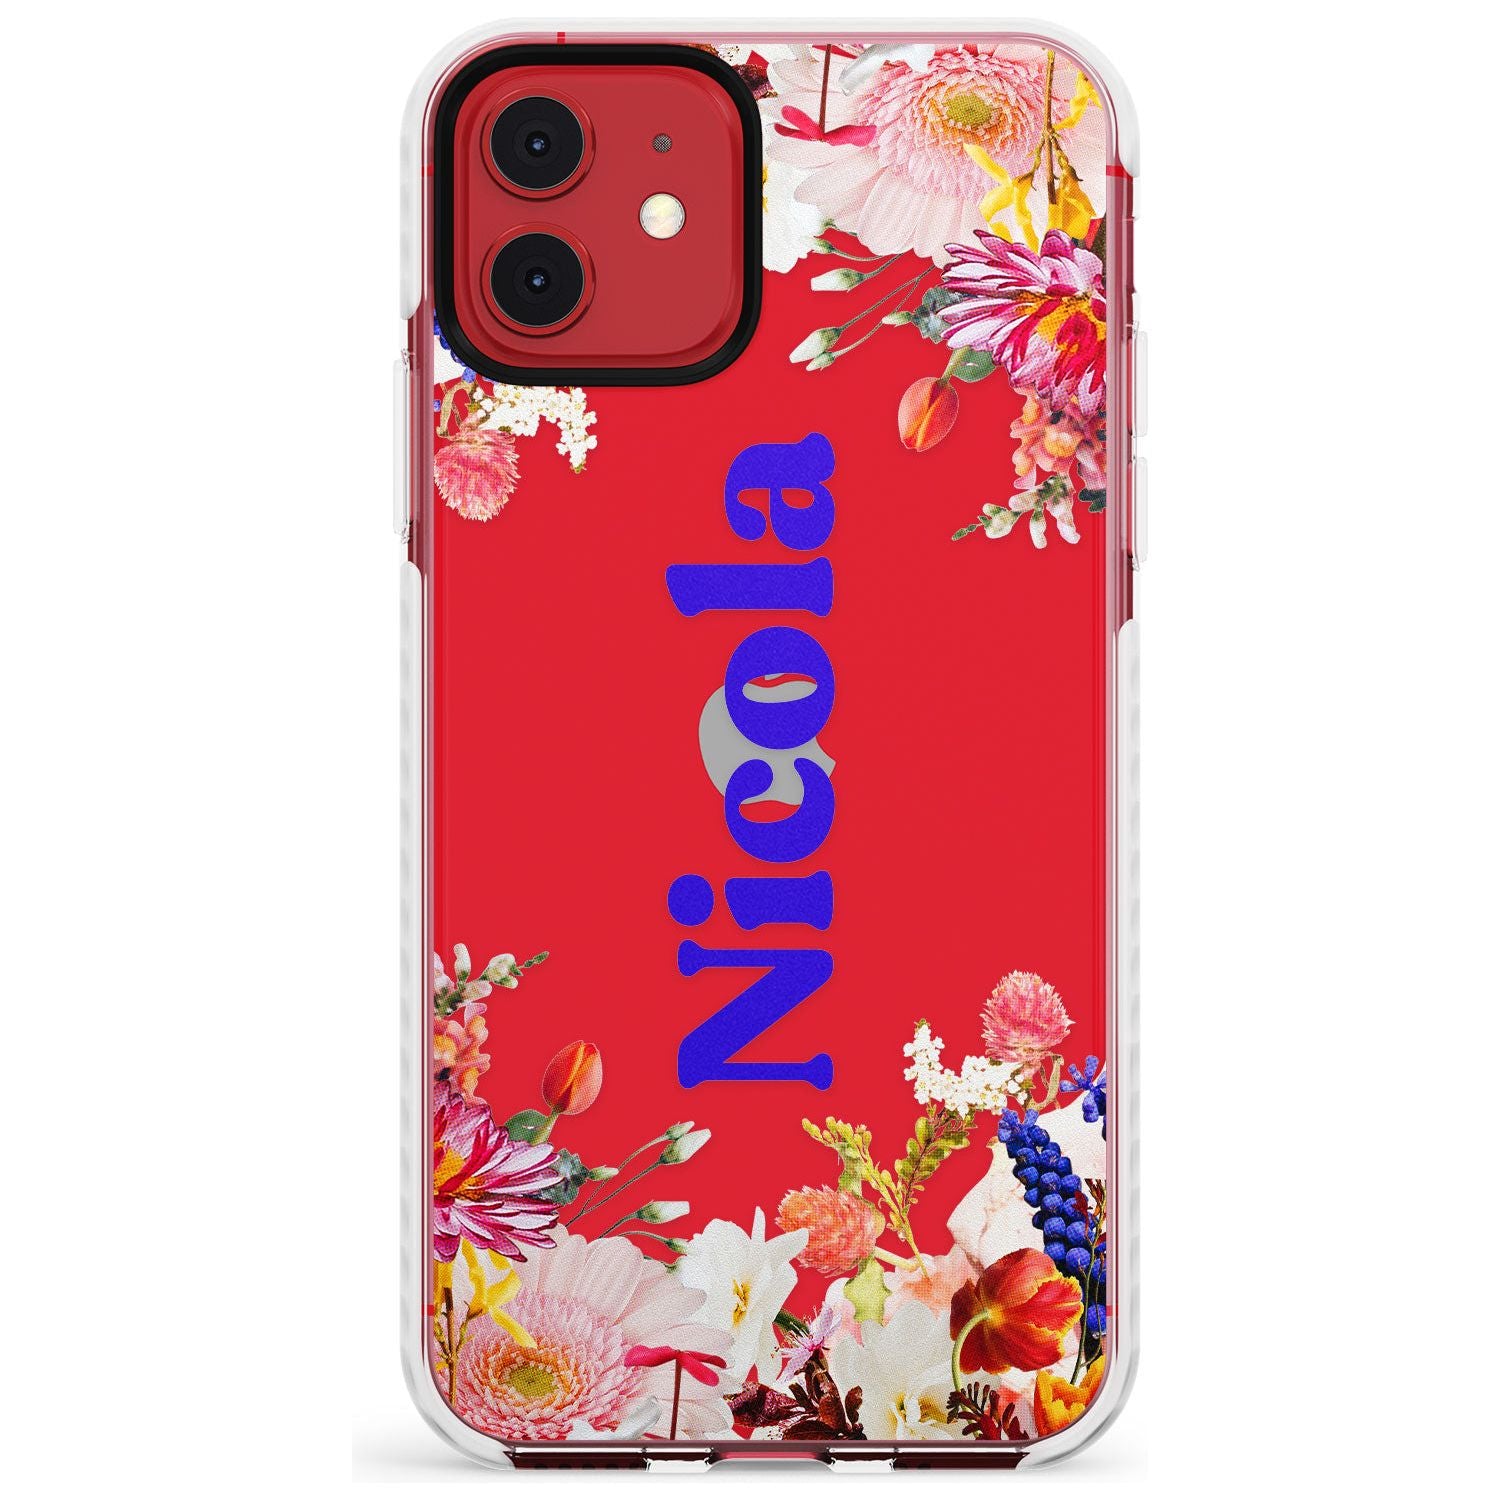 Custom Text with Floral Borders Slim TPU Phone Case for iPhone 11